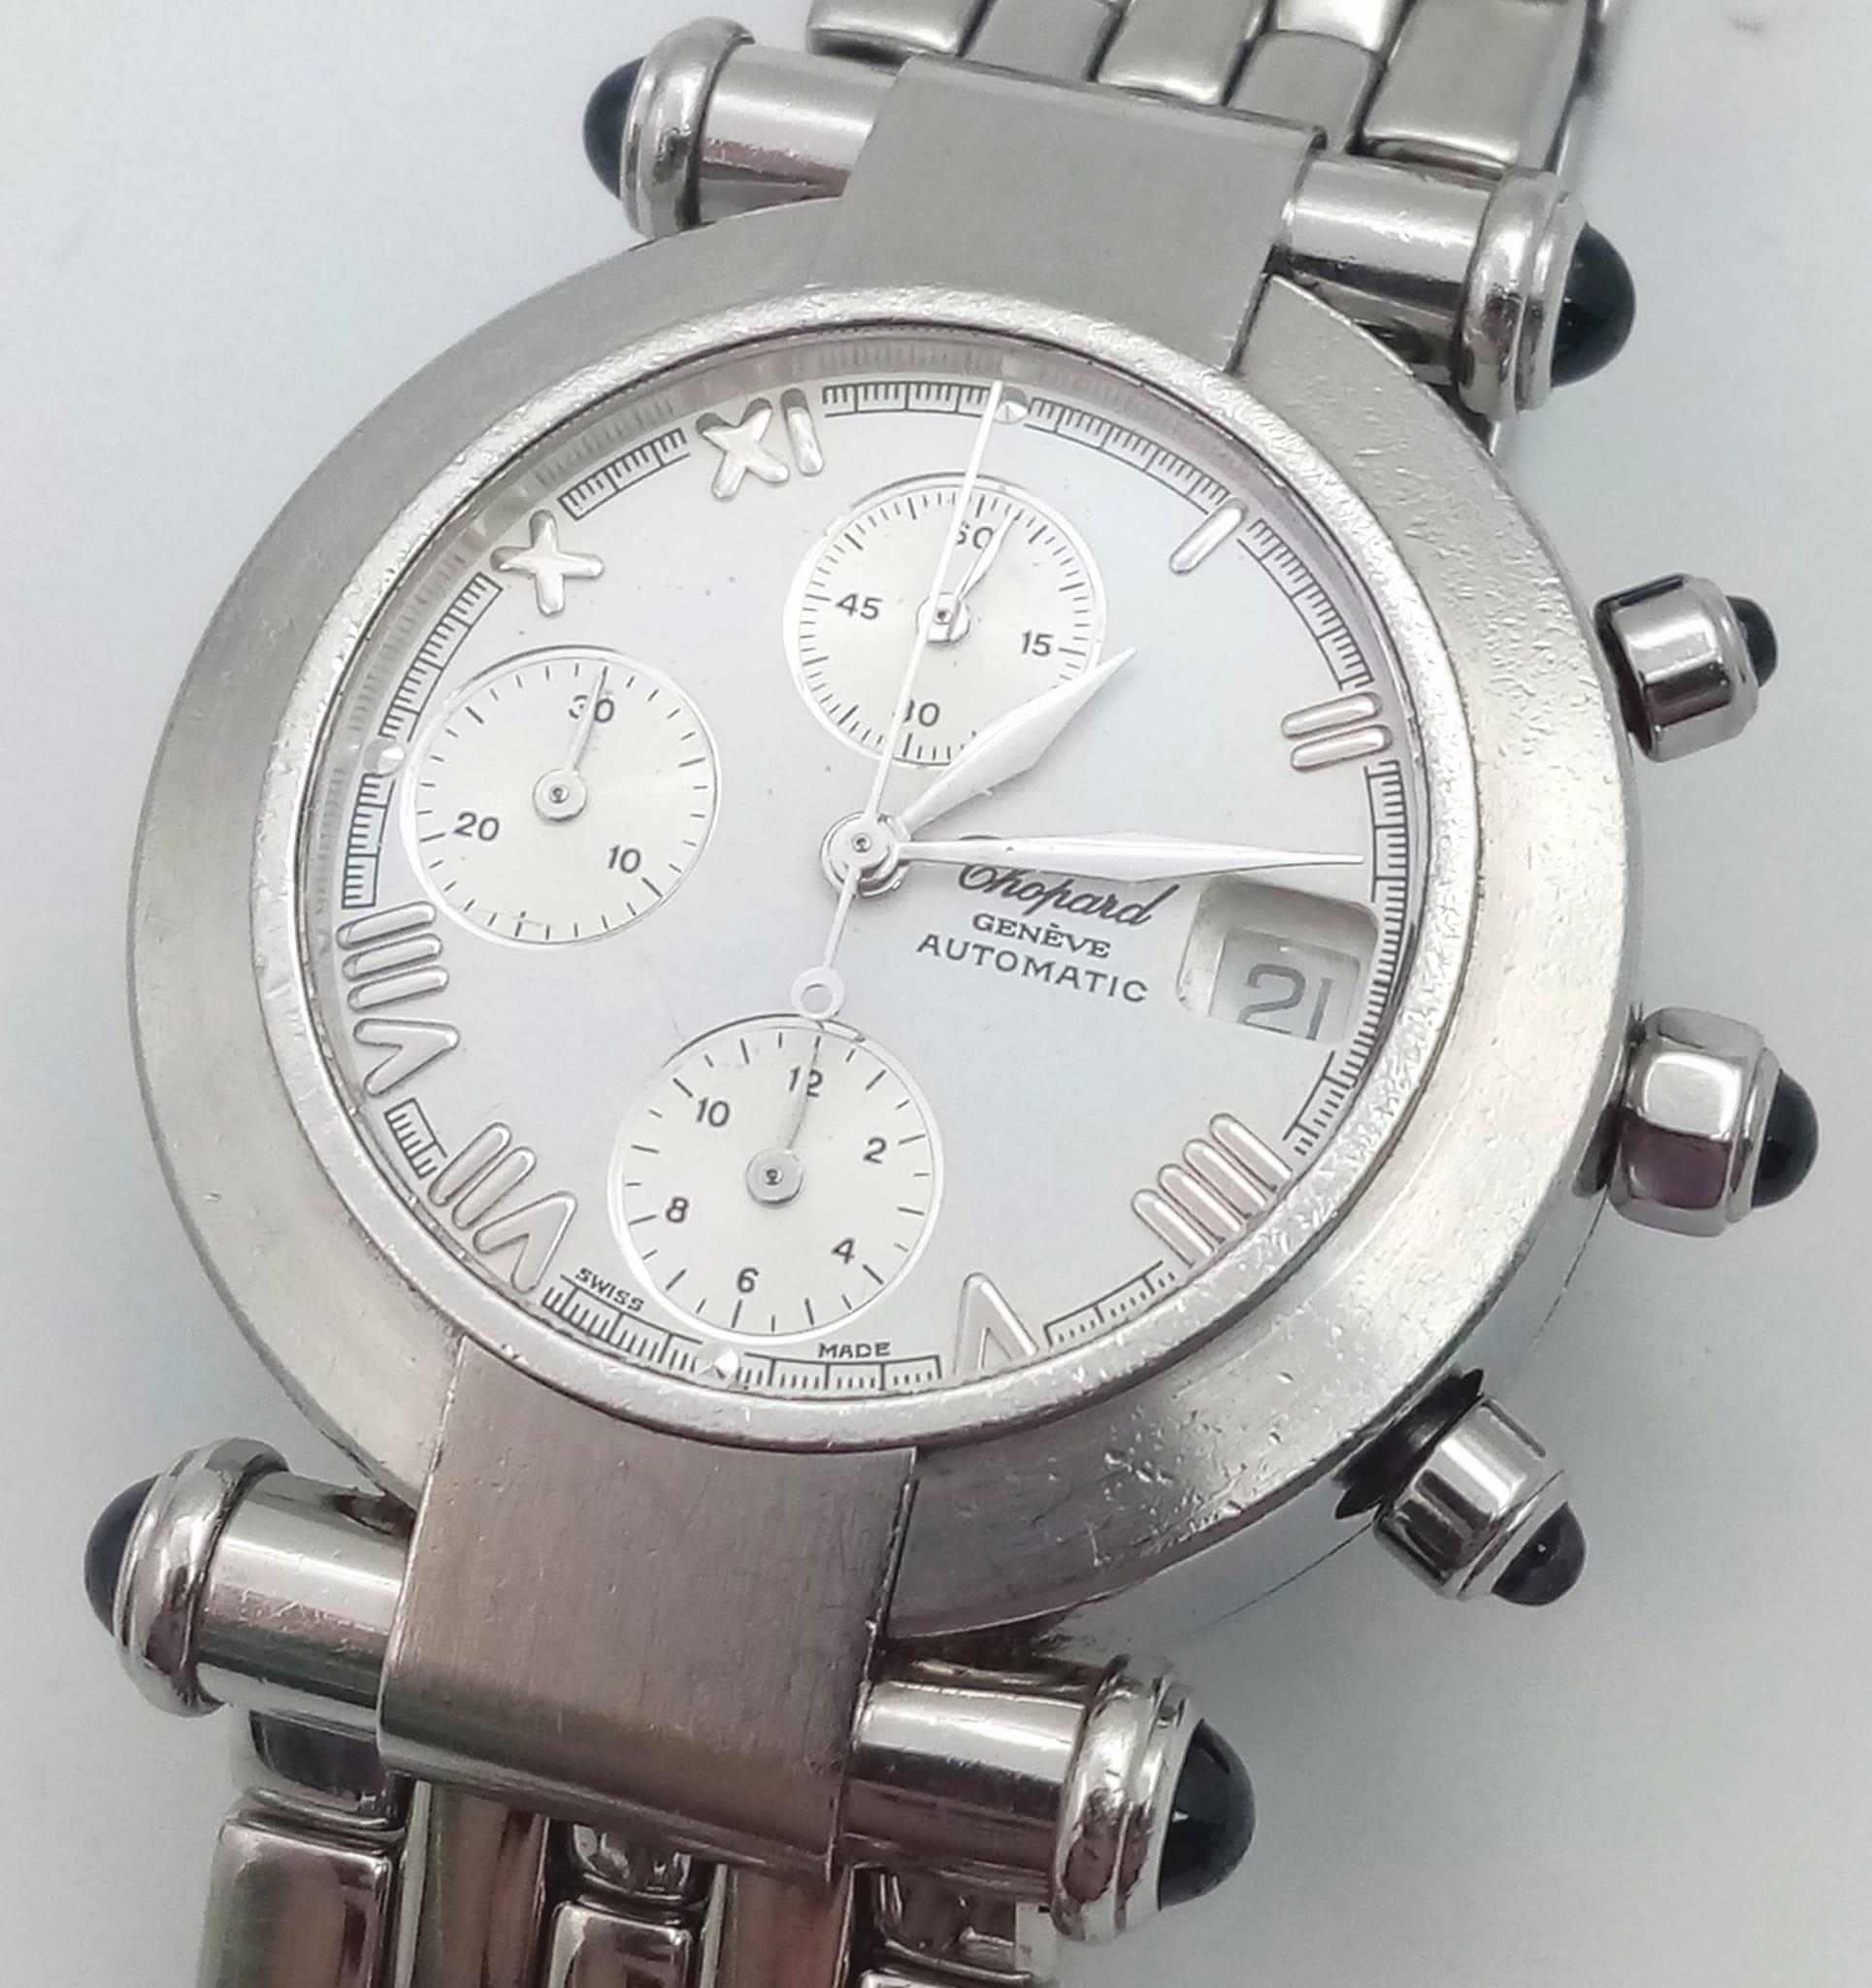 A Chopard Automatic Chronograph Gents Watch. Stainless steel bracelet and case - 37mm. White dial - Image 10 of 16